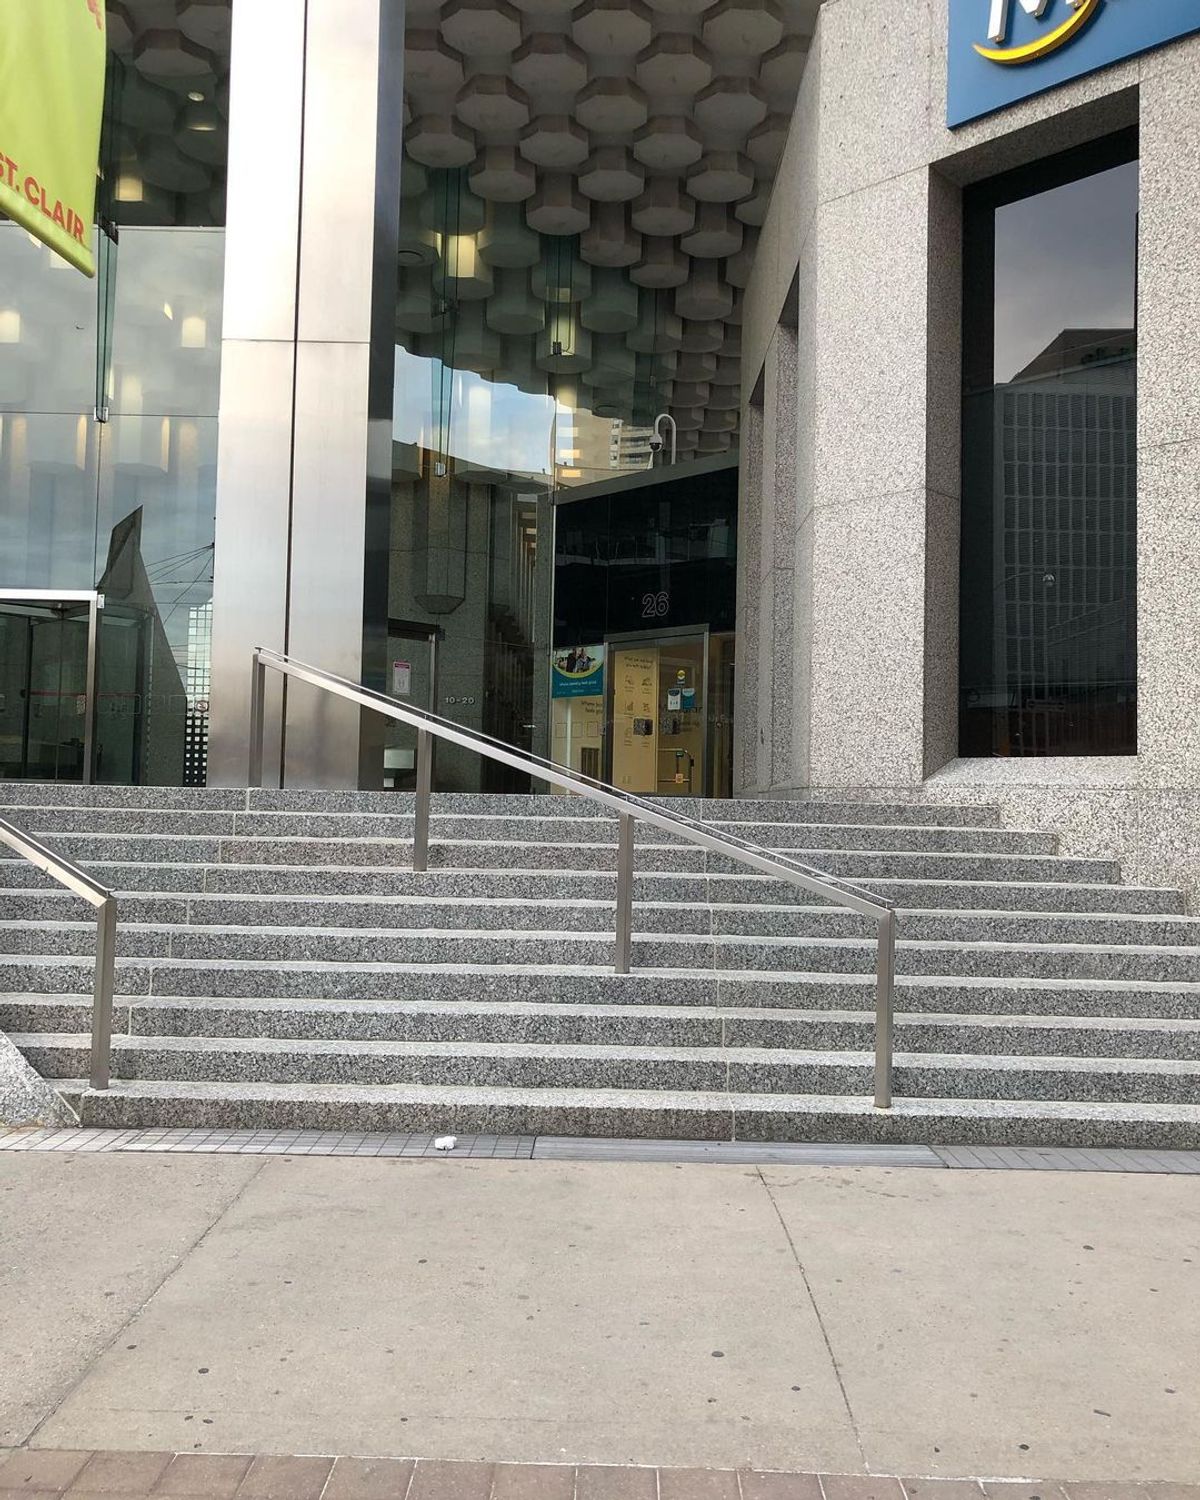 Image for skate spot St Clair Ave - 10 Stair Gap Over Rail